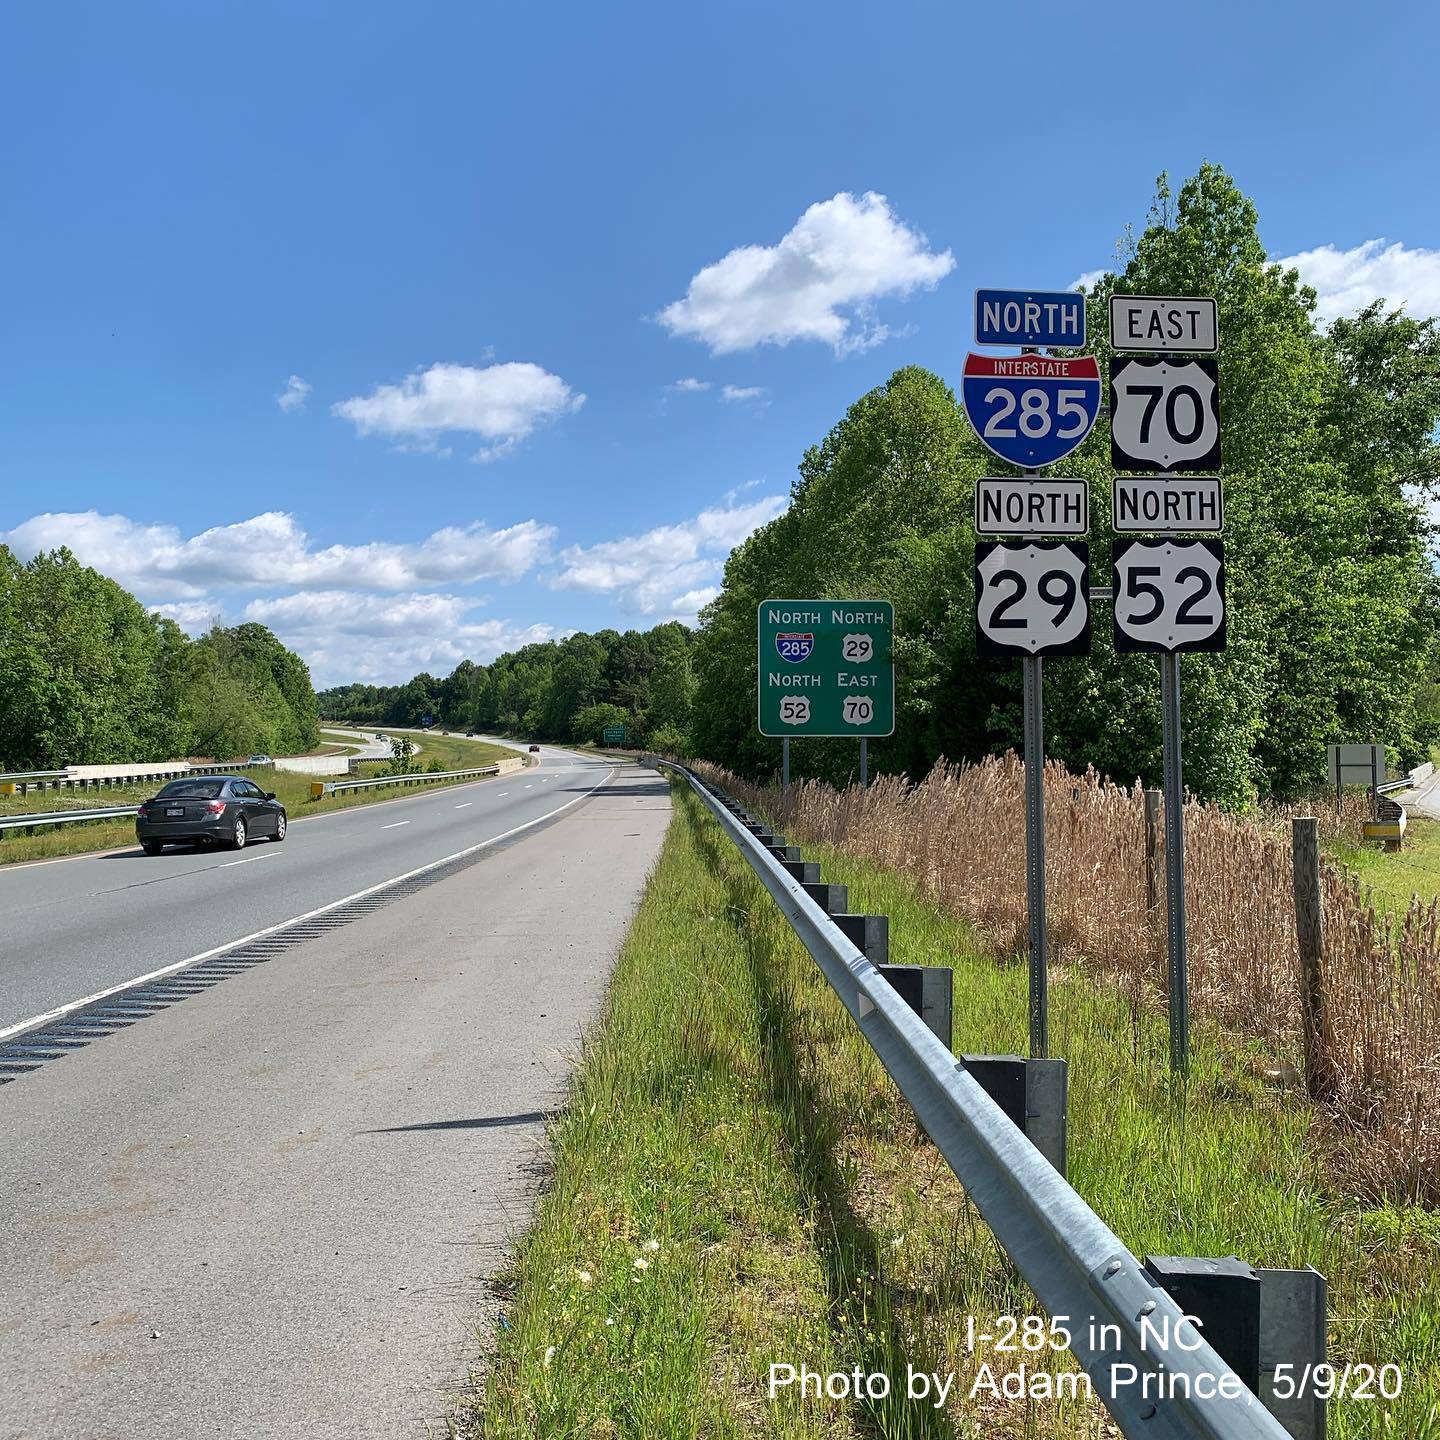 Image of now duplicate North I-285/US 29/US 52 and East US 70 reassurance markerse with newly placed reassurance marker sign in background in Lexington, by Adam Prince, May 9, 2020